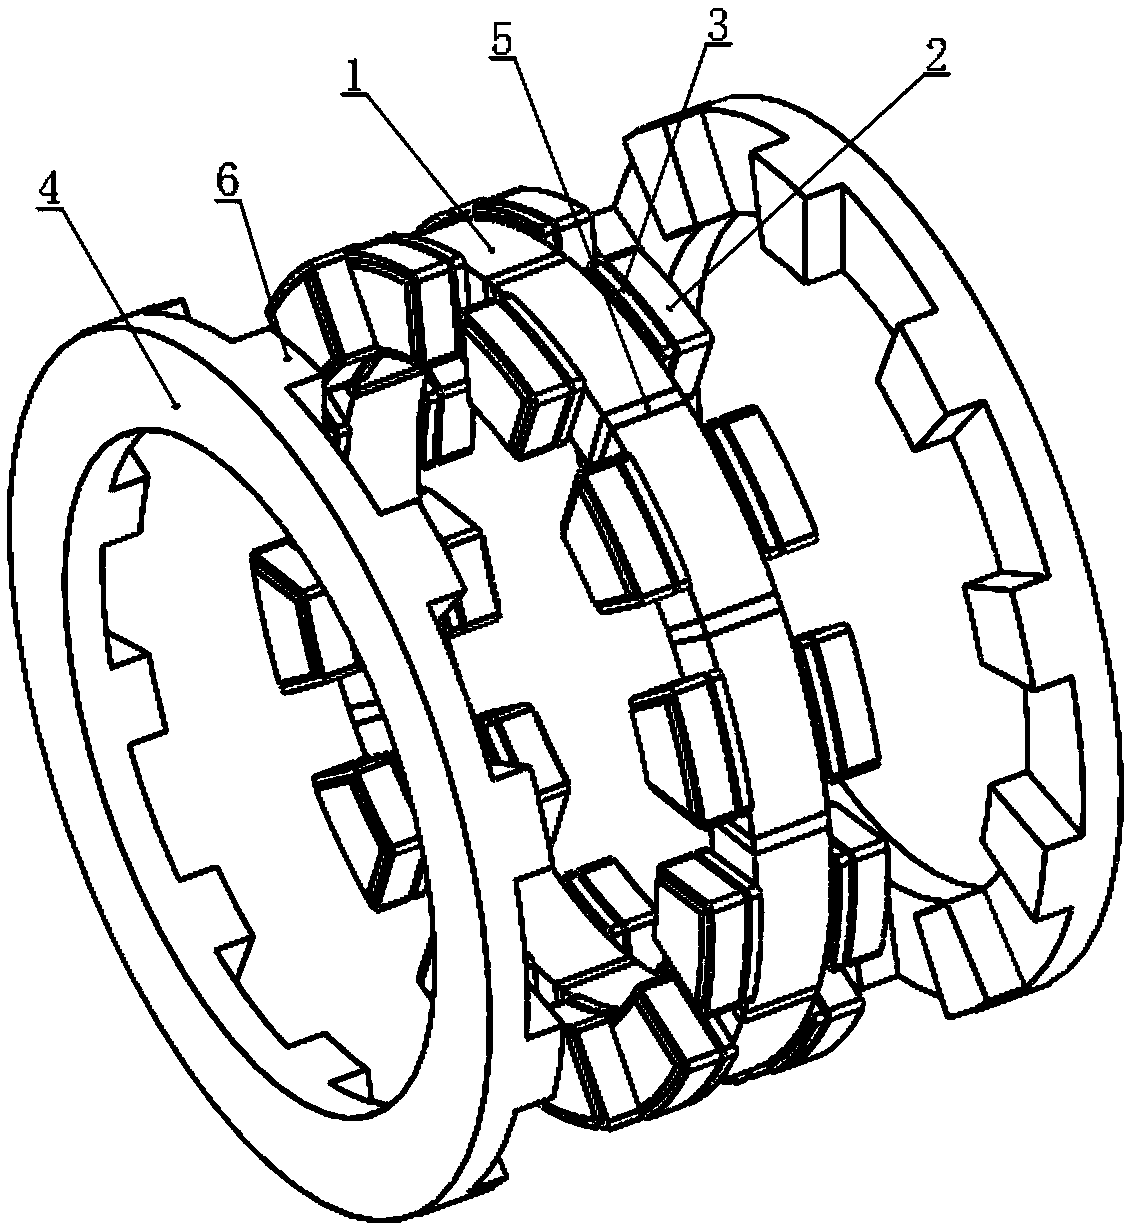 A composite excited amorphous alloy axial reluctance motor